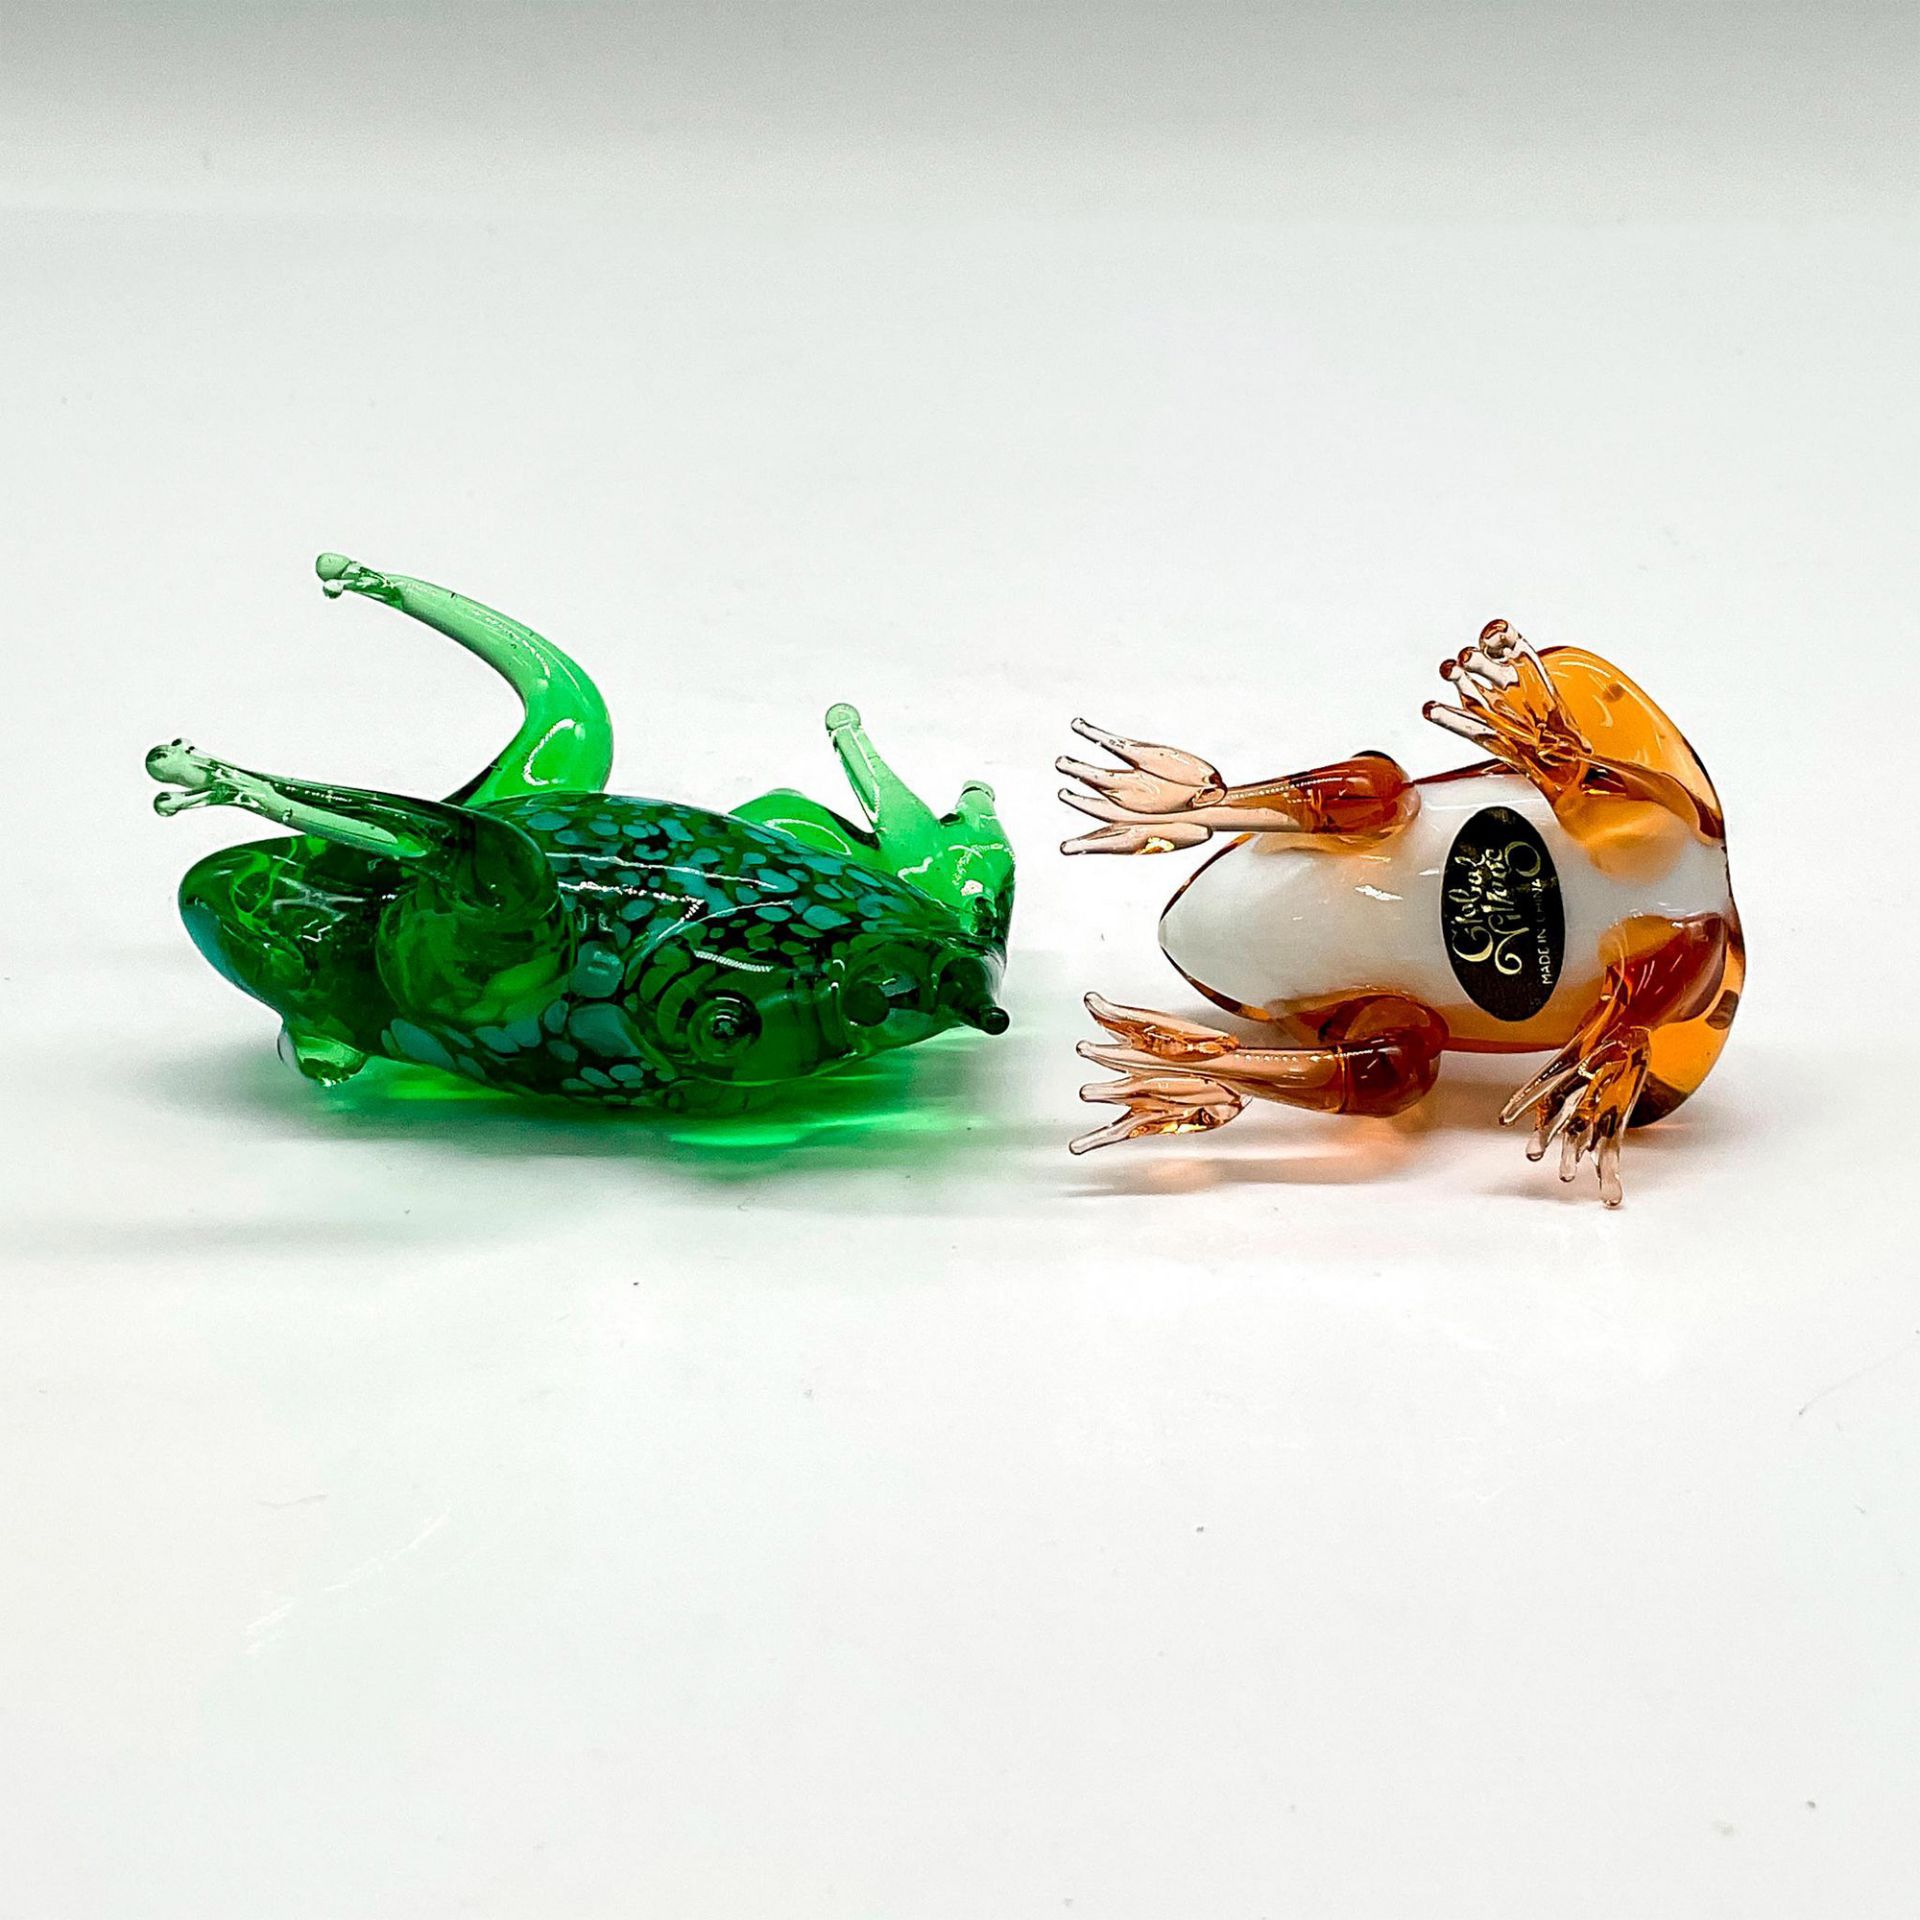 2pc Global Village Art Glass Figurines, Frogs - Image 3 of 3